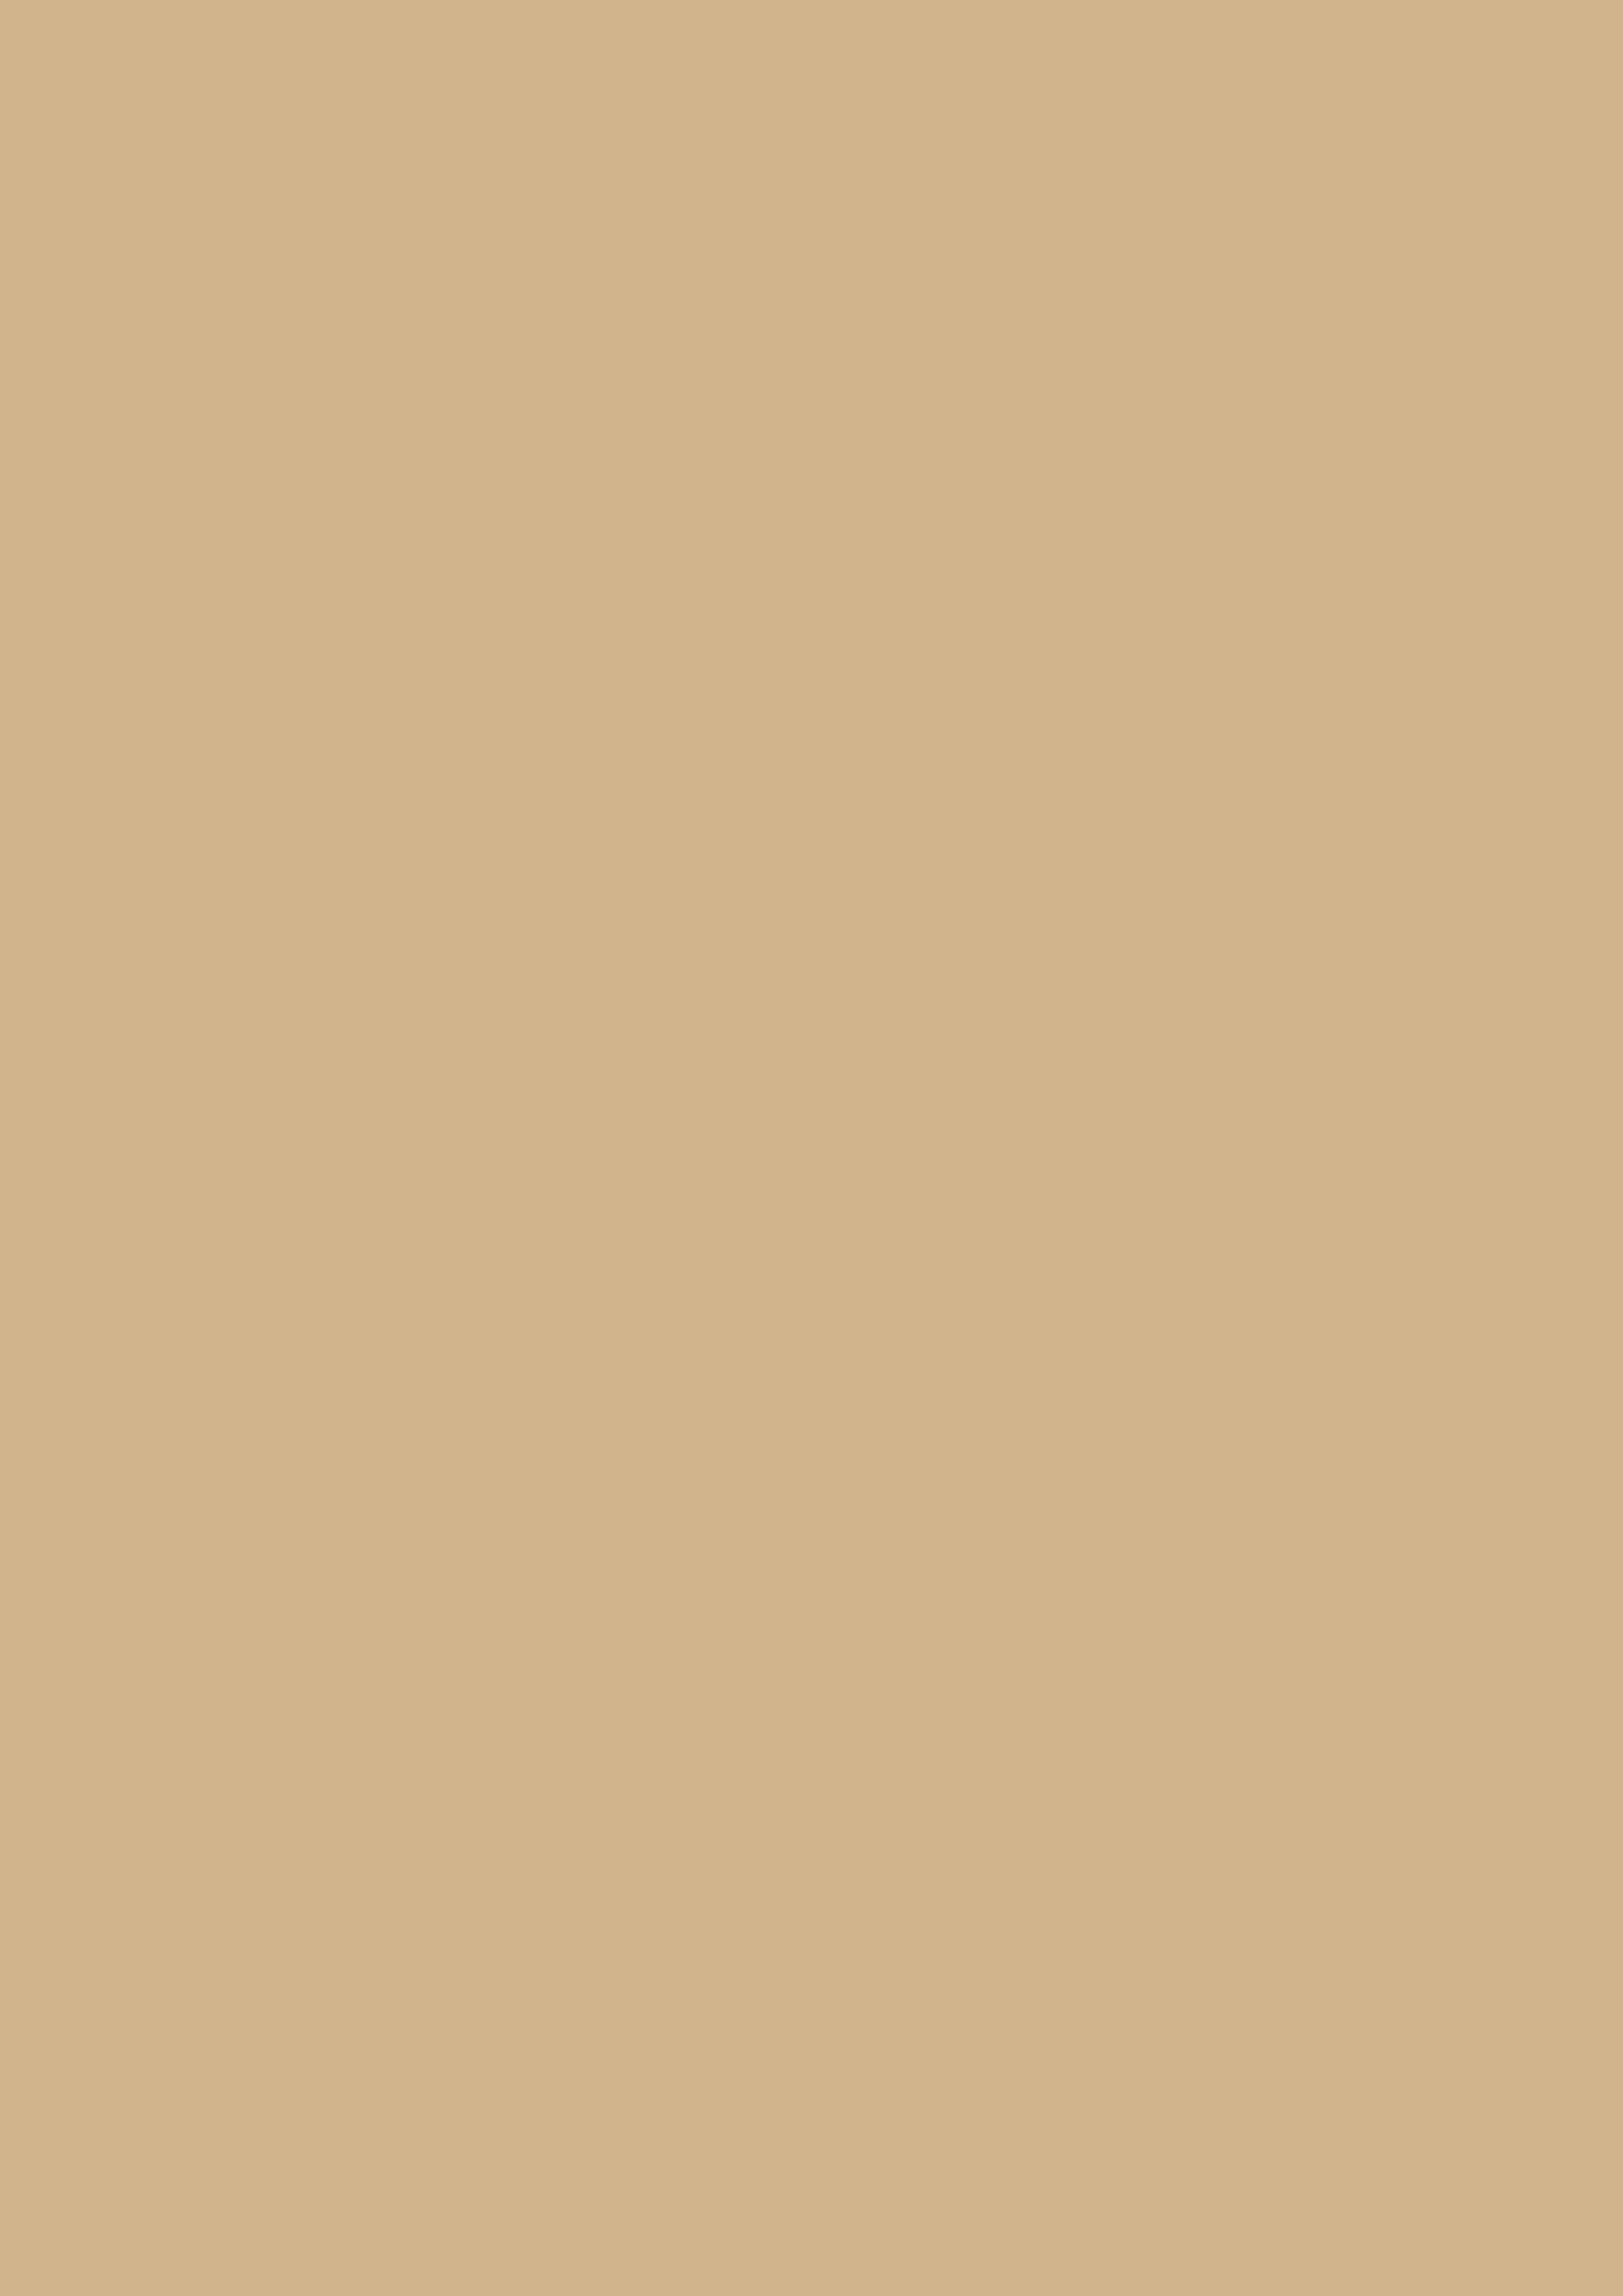 2480x3508 Tan Solid Color Background